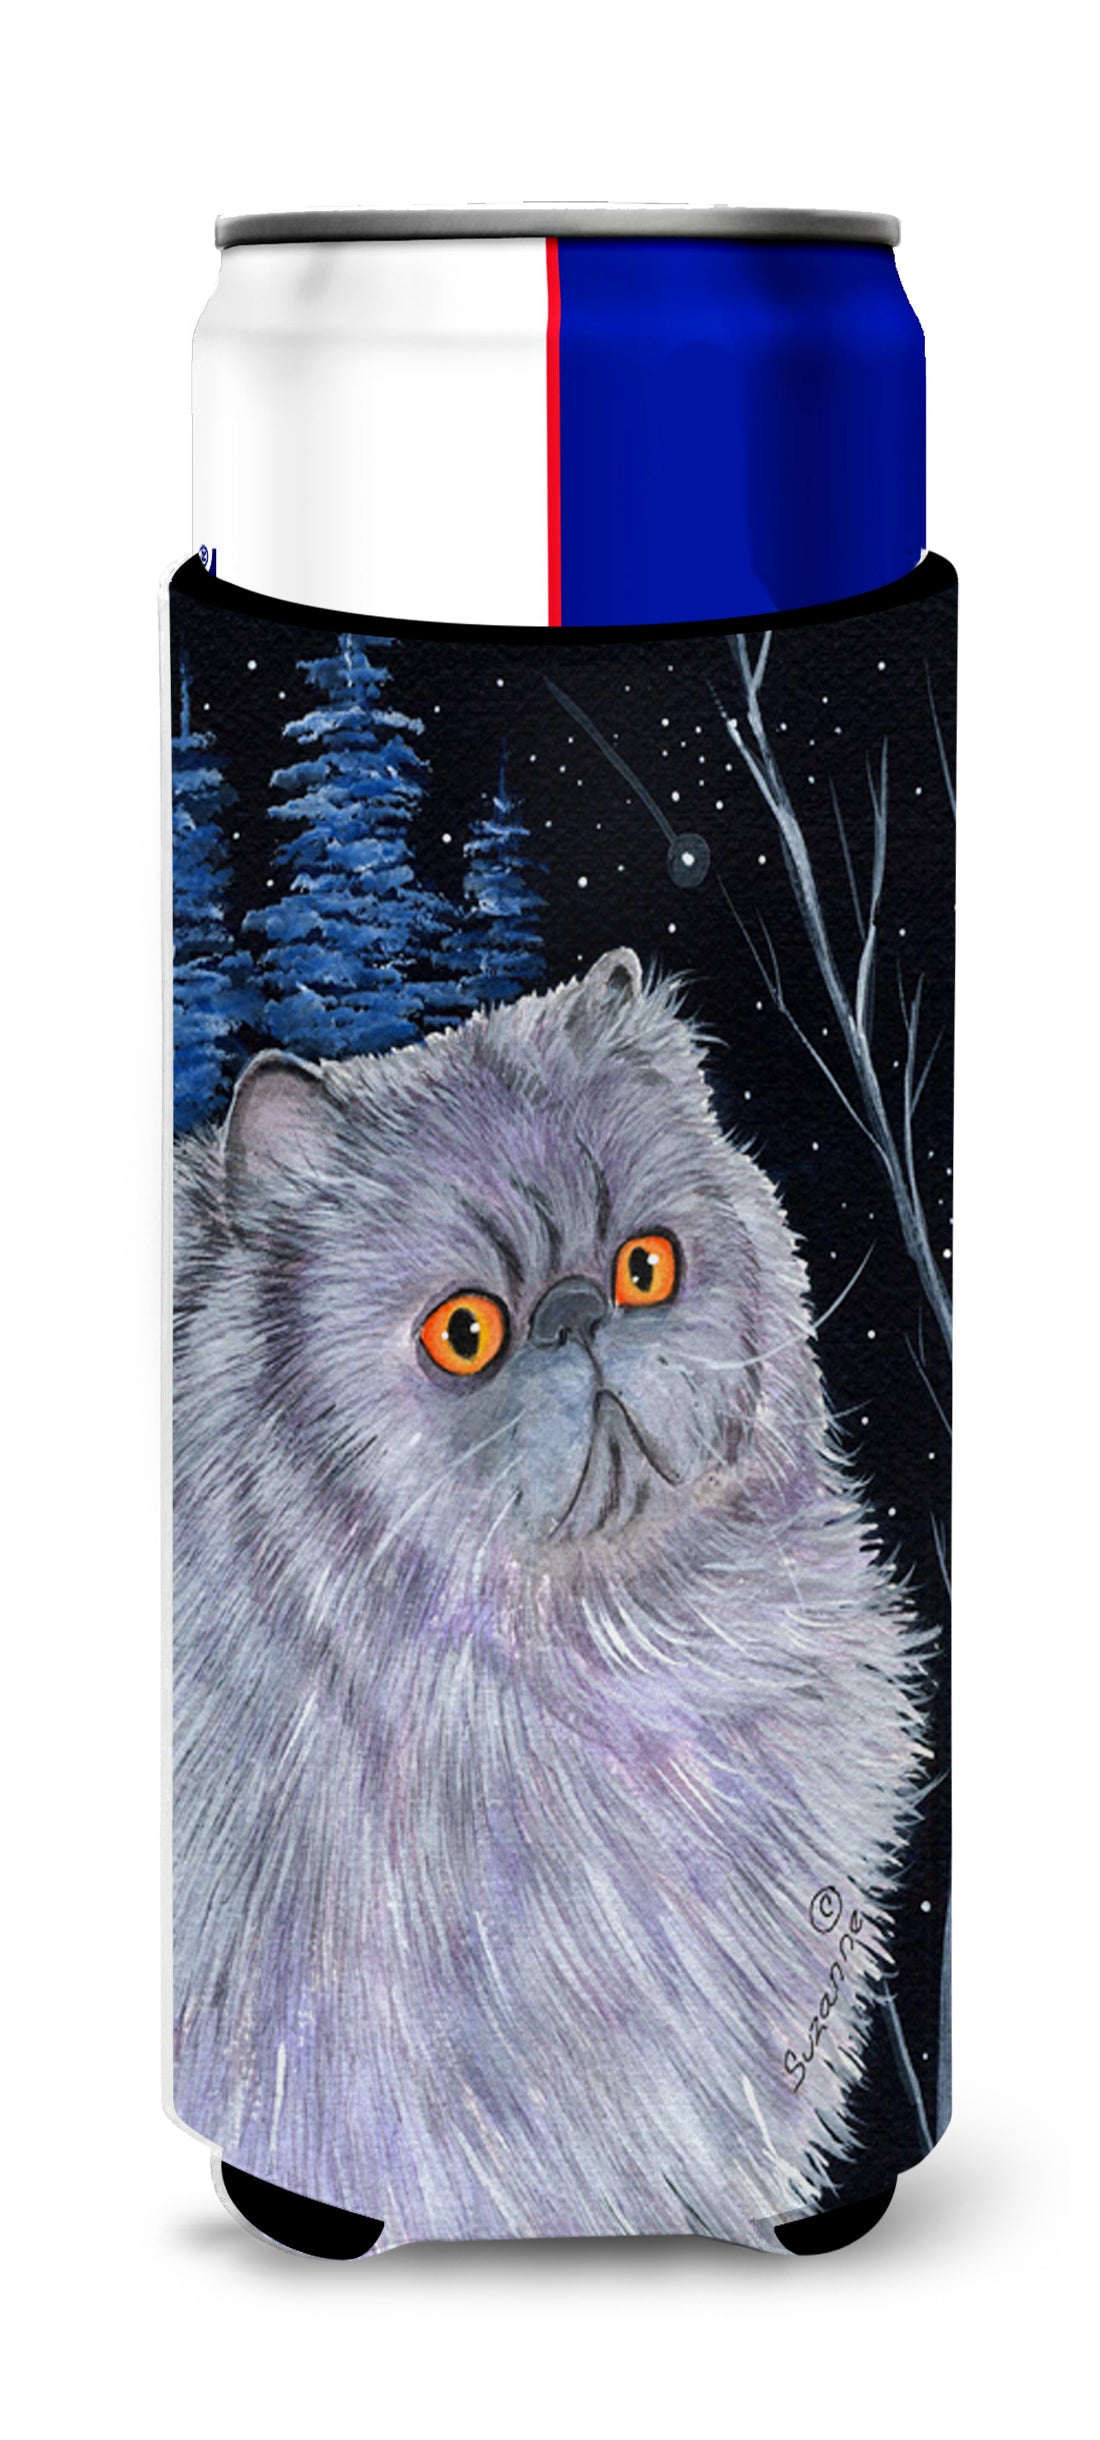 Starry Night Cat - Persian Ultra Beverage Insulators for slim cans SS8402MUK.